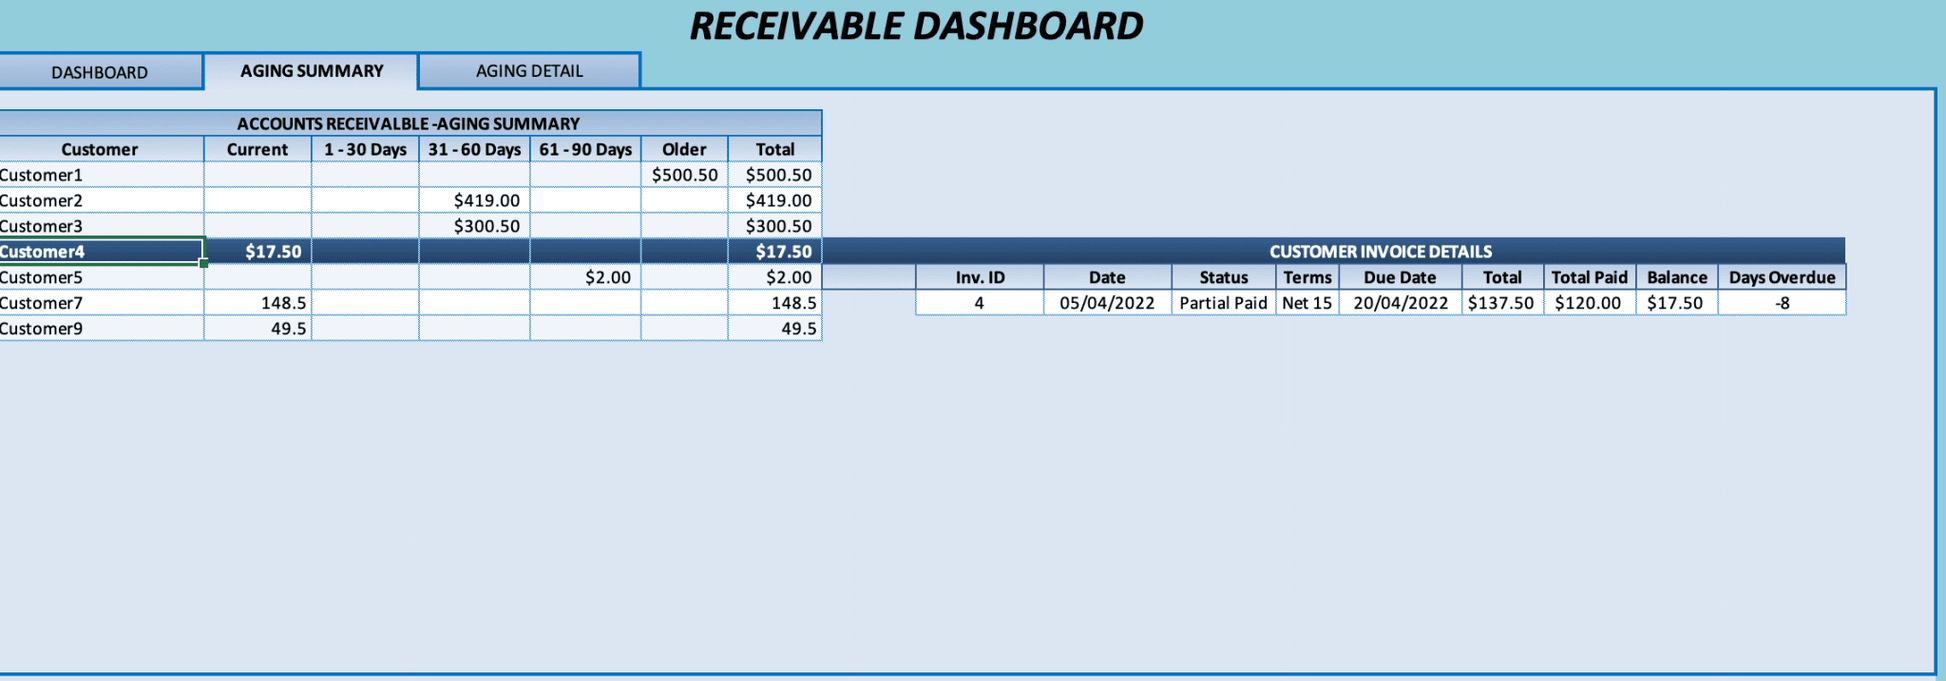 Invoicing and Receivables Generator | XLDB Spreadsheet Solutions